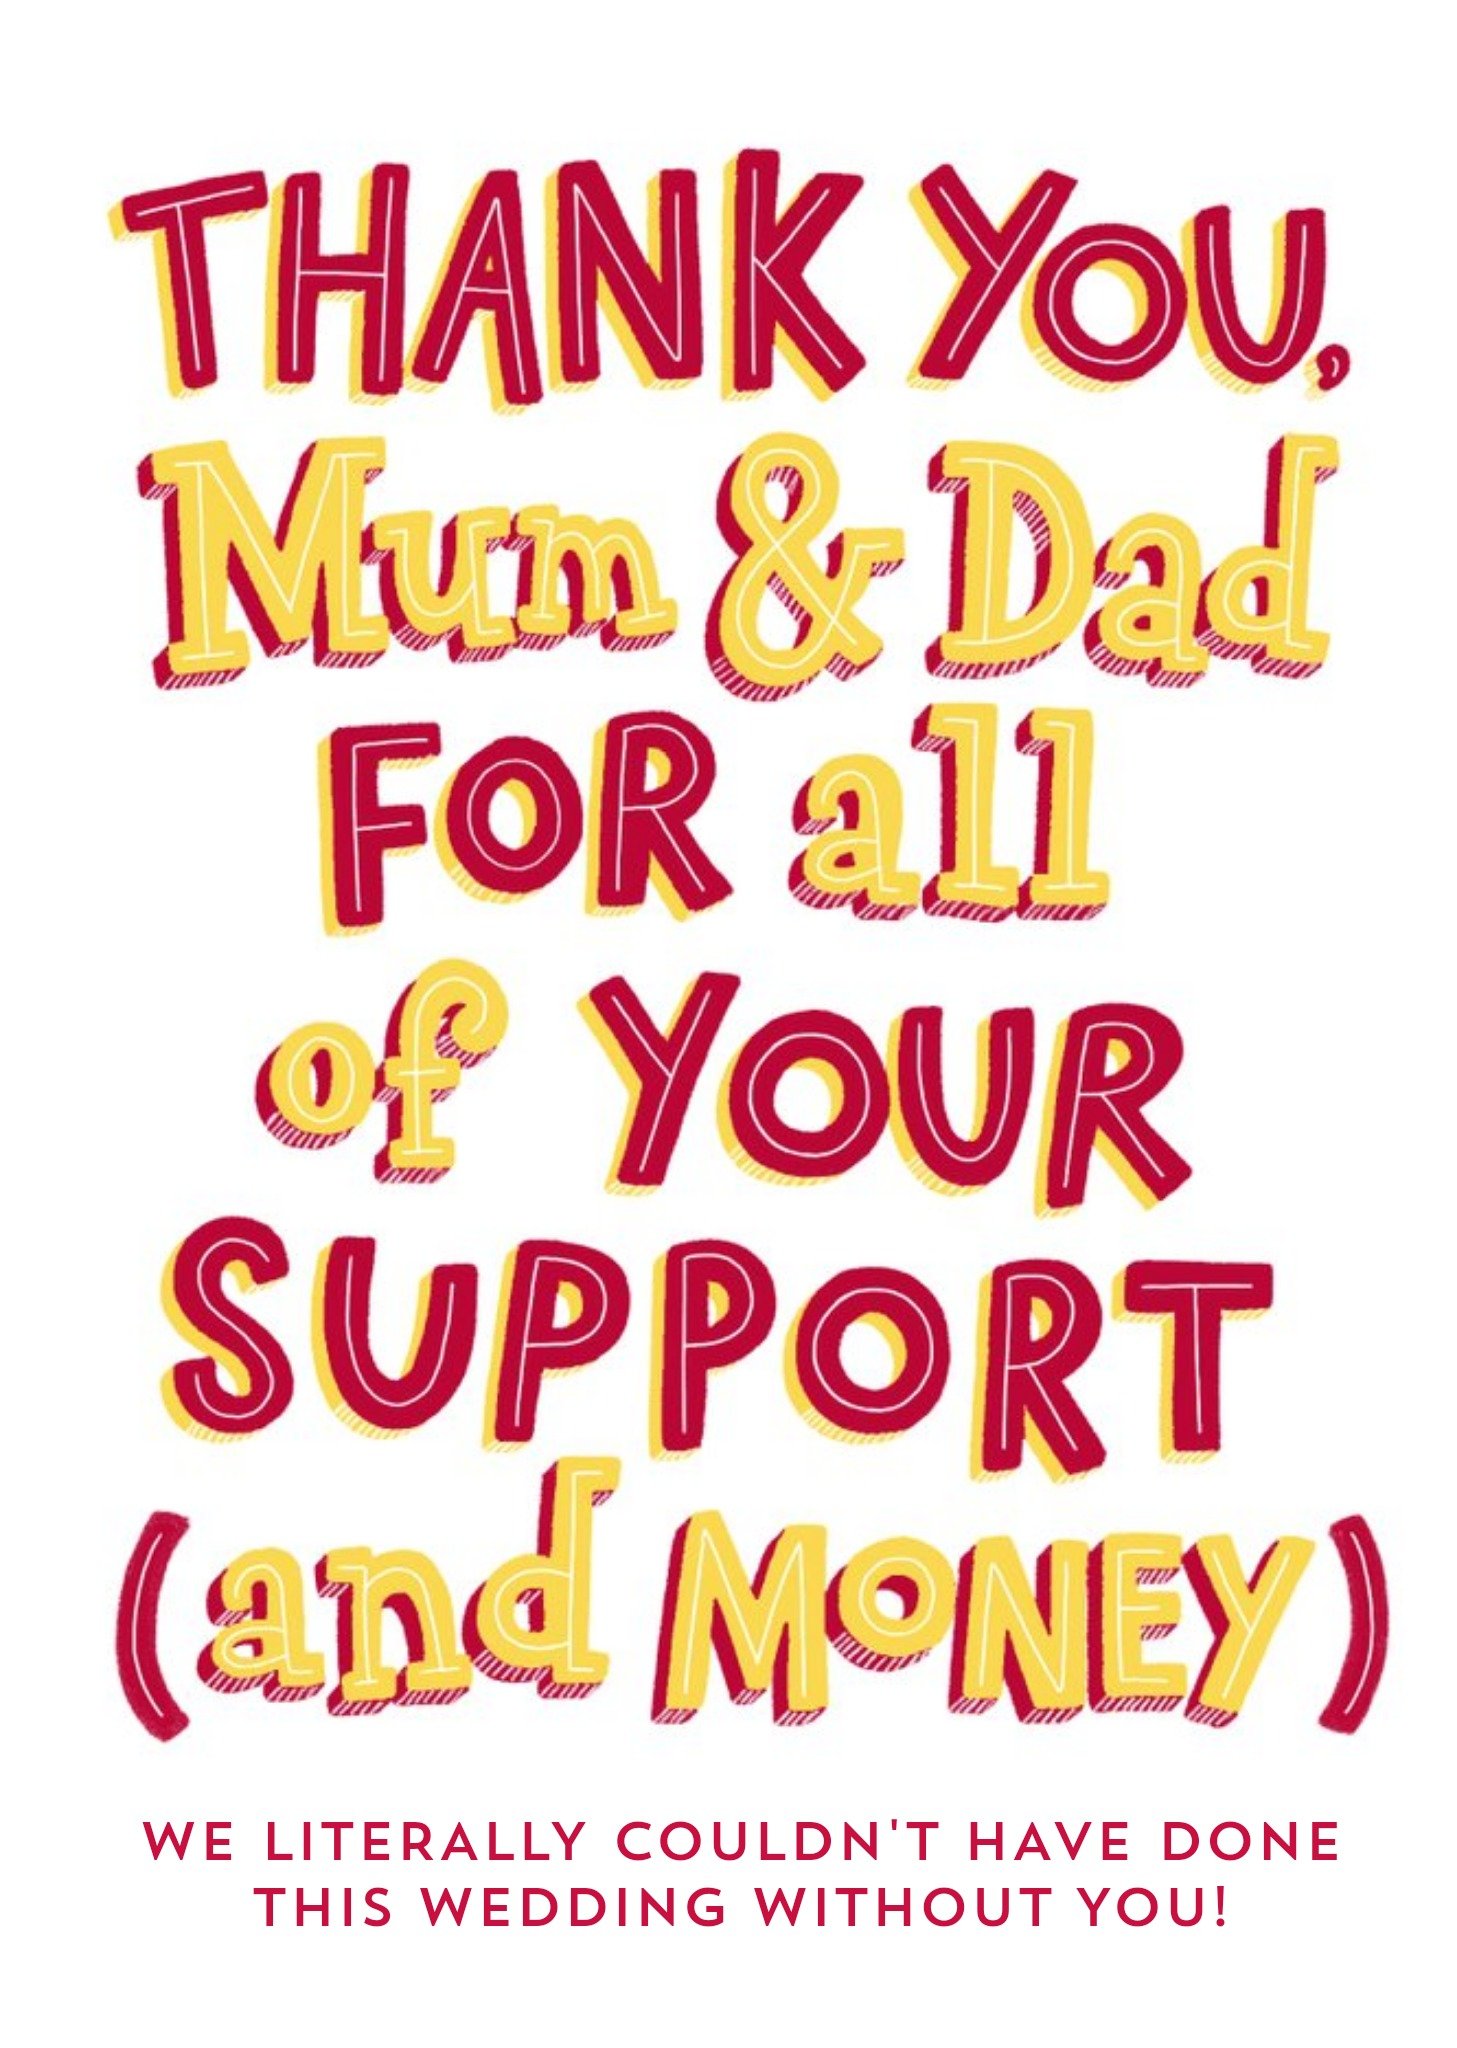 Moonpig Humour Comedy Funny Thank You Mum & Dad For Your Support And Money Wedding Thank You Card, L